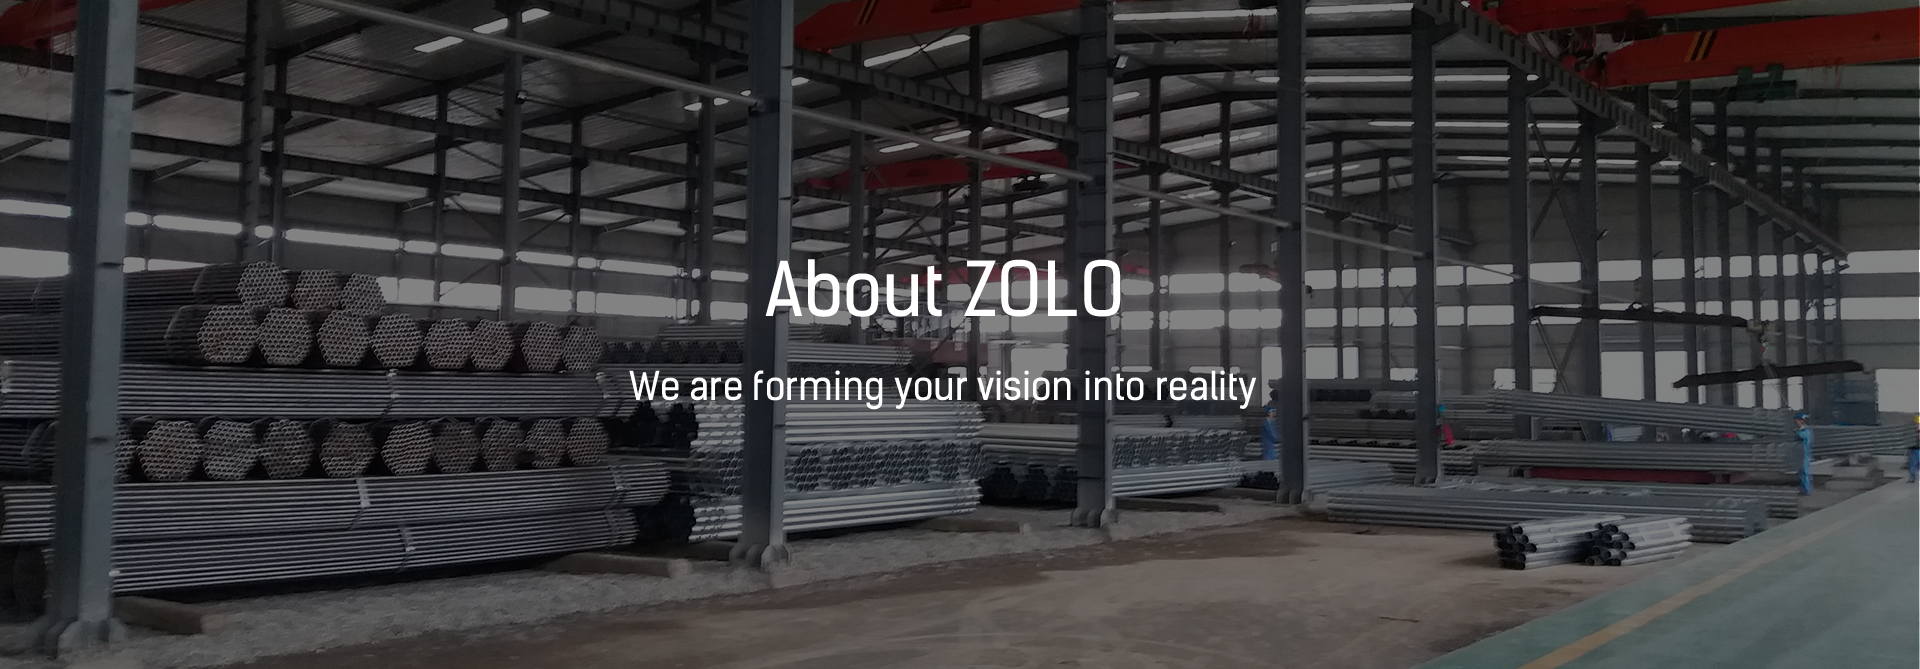 About ZOLO